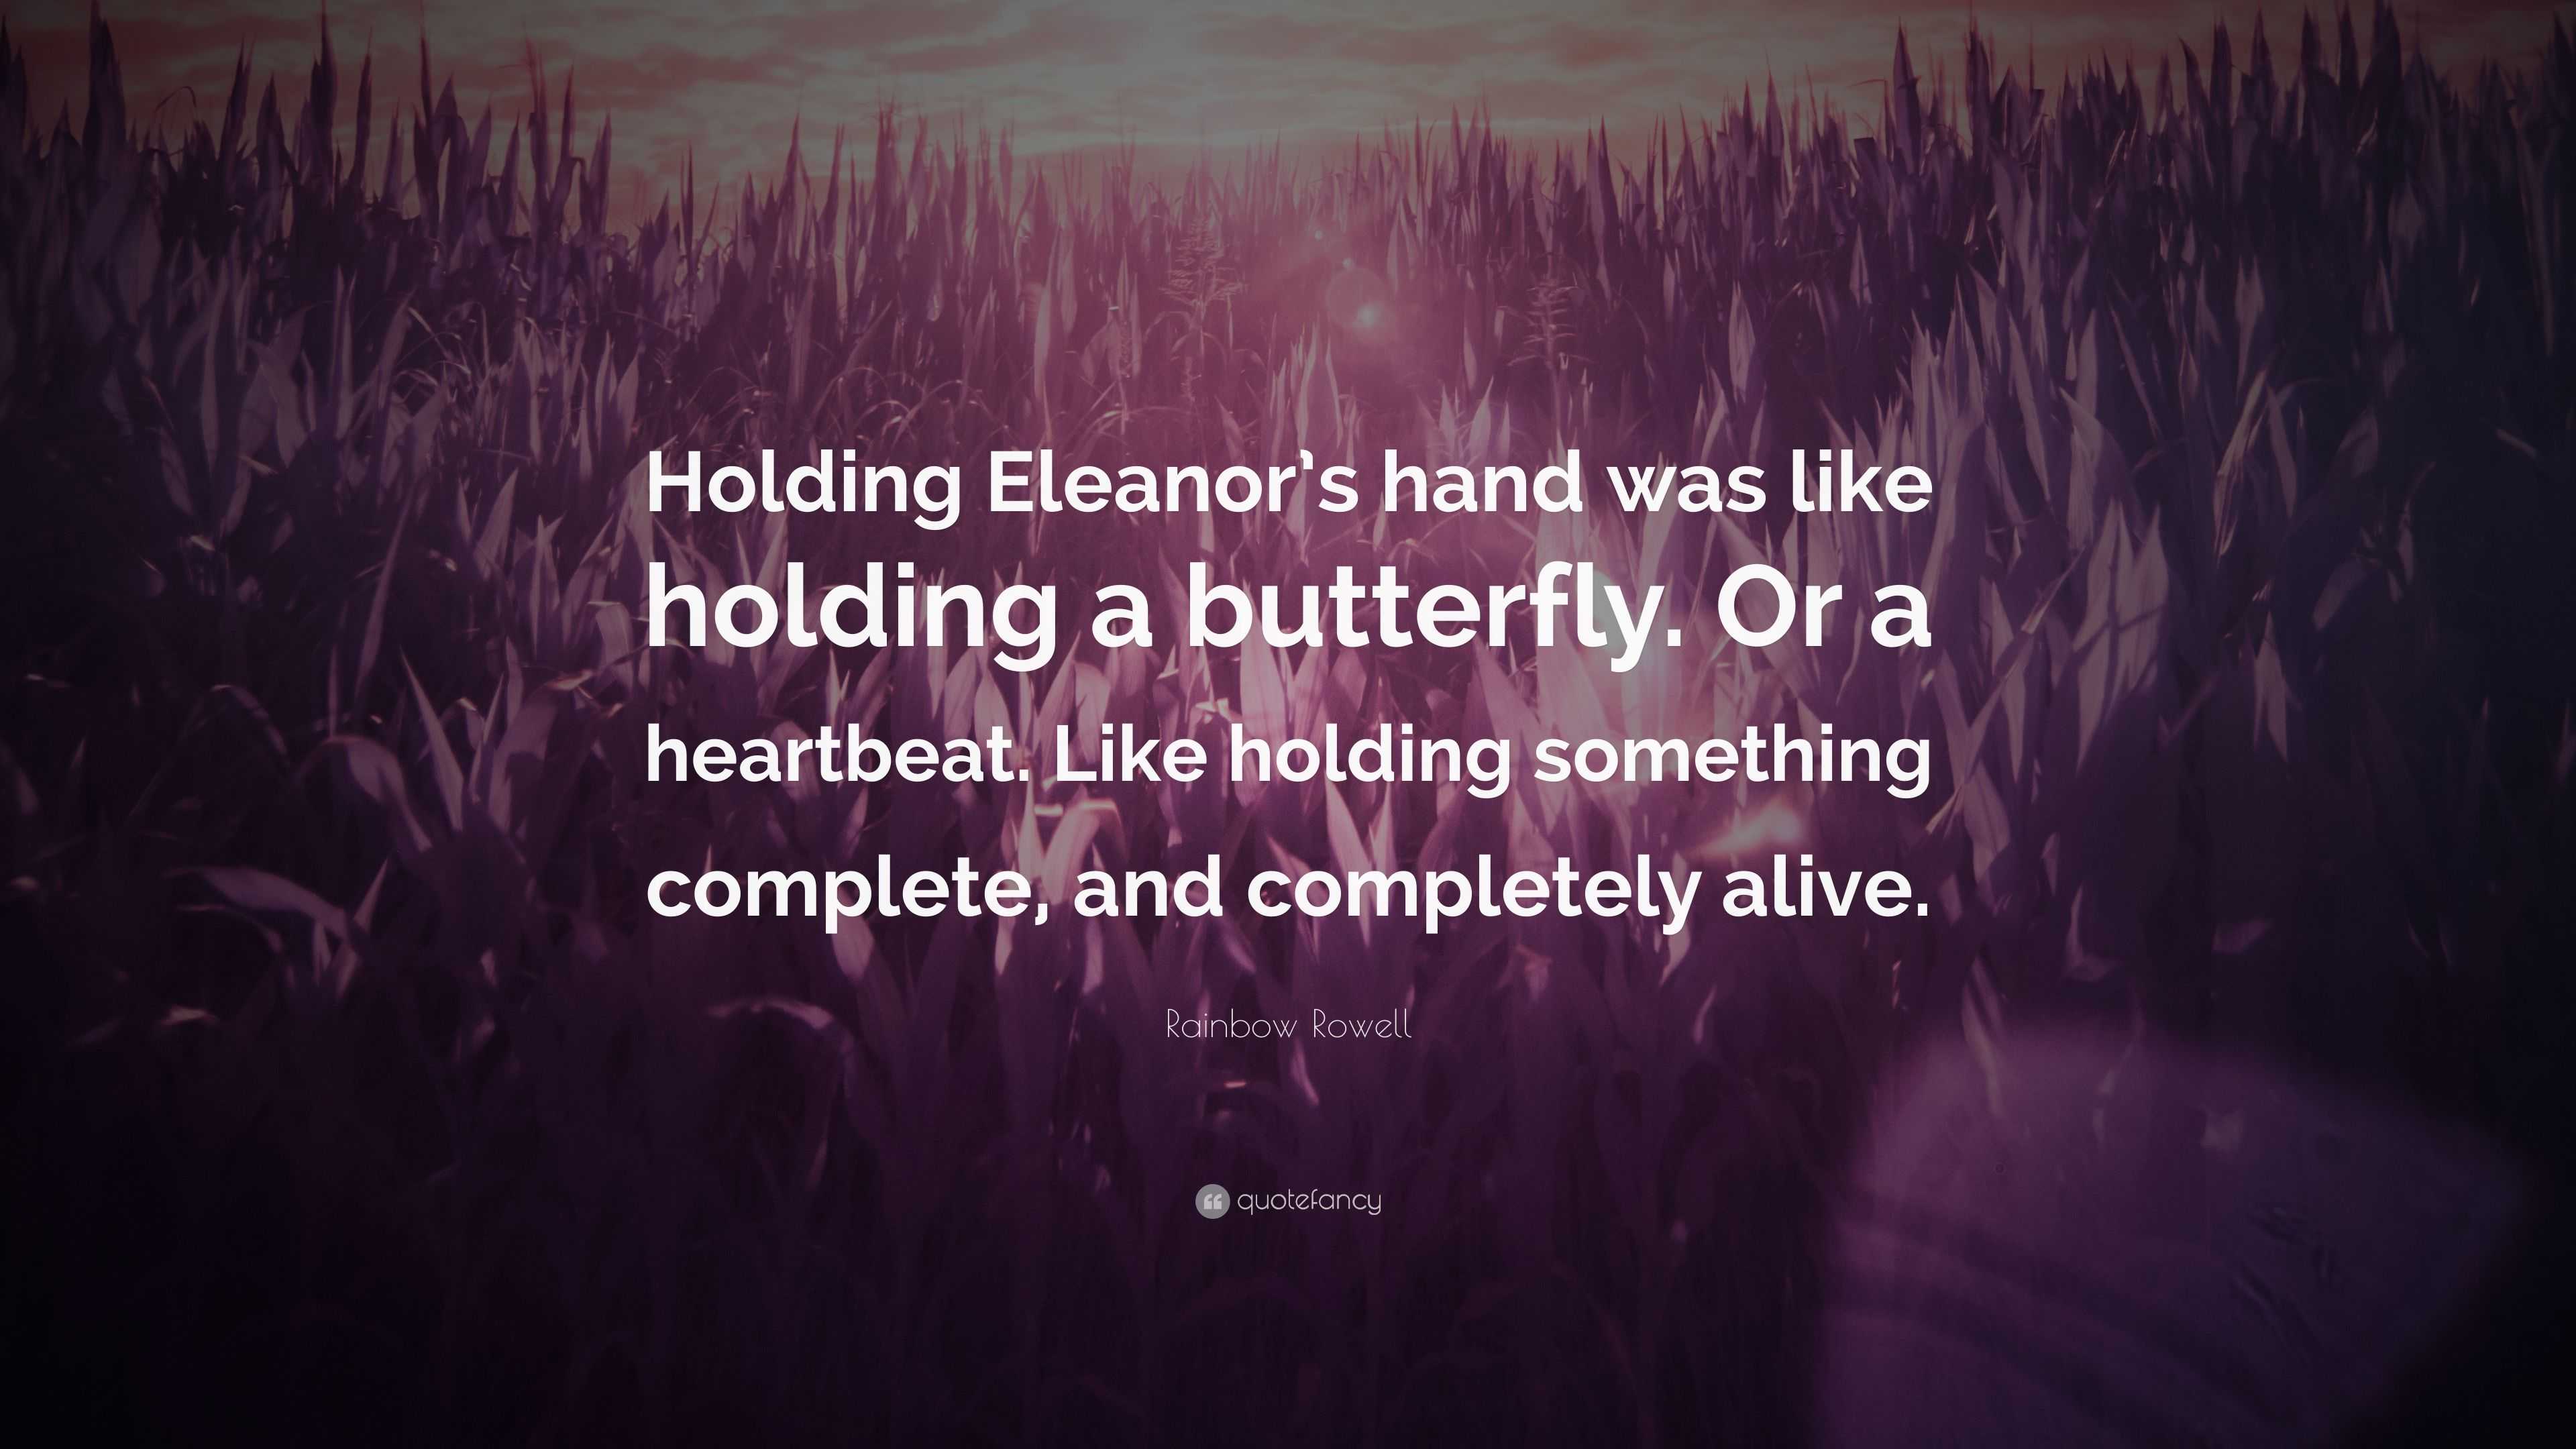 Rainbow Rowell Quote “Holding Eleanor s hand was like holding a butterfly a